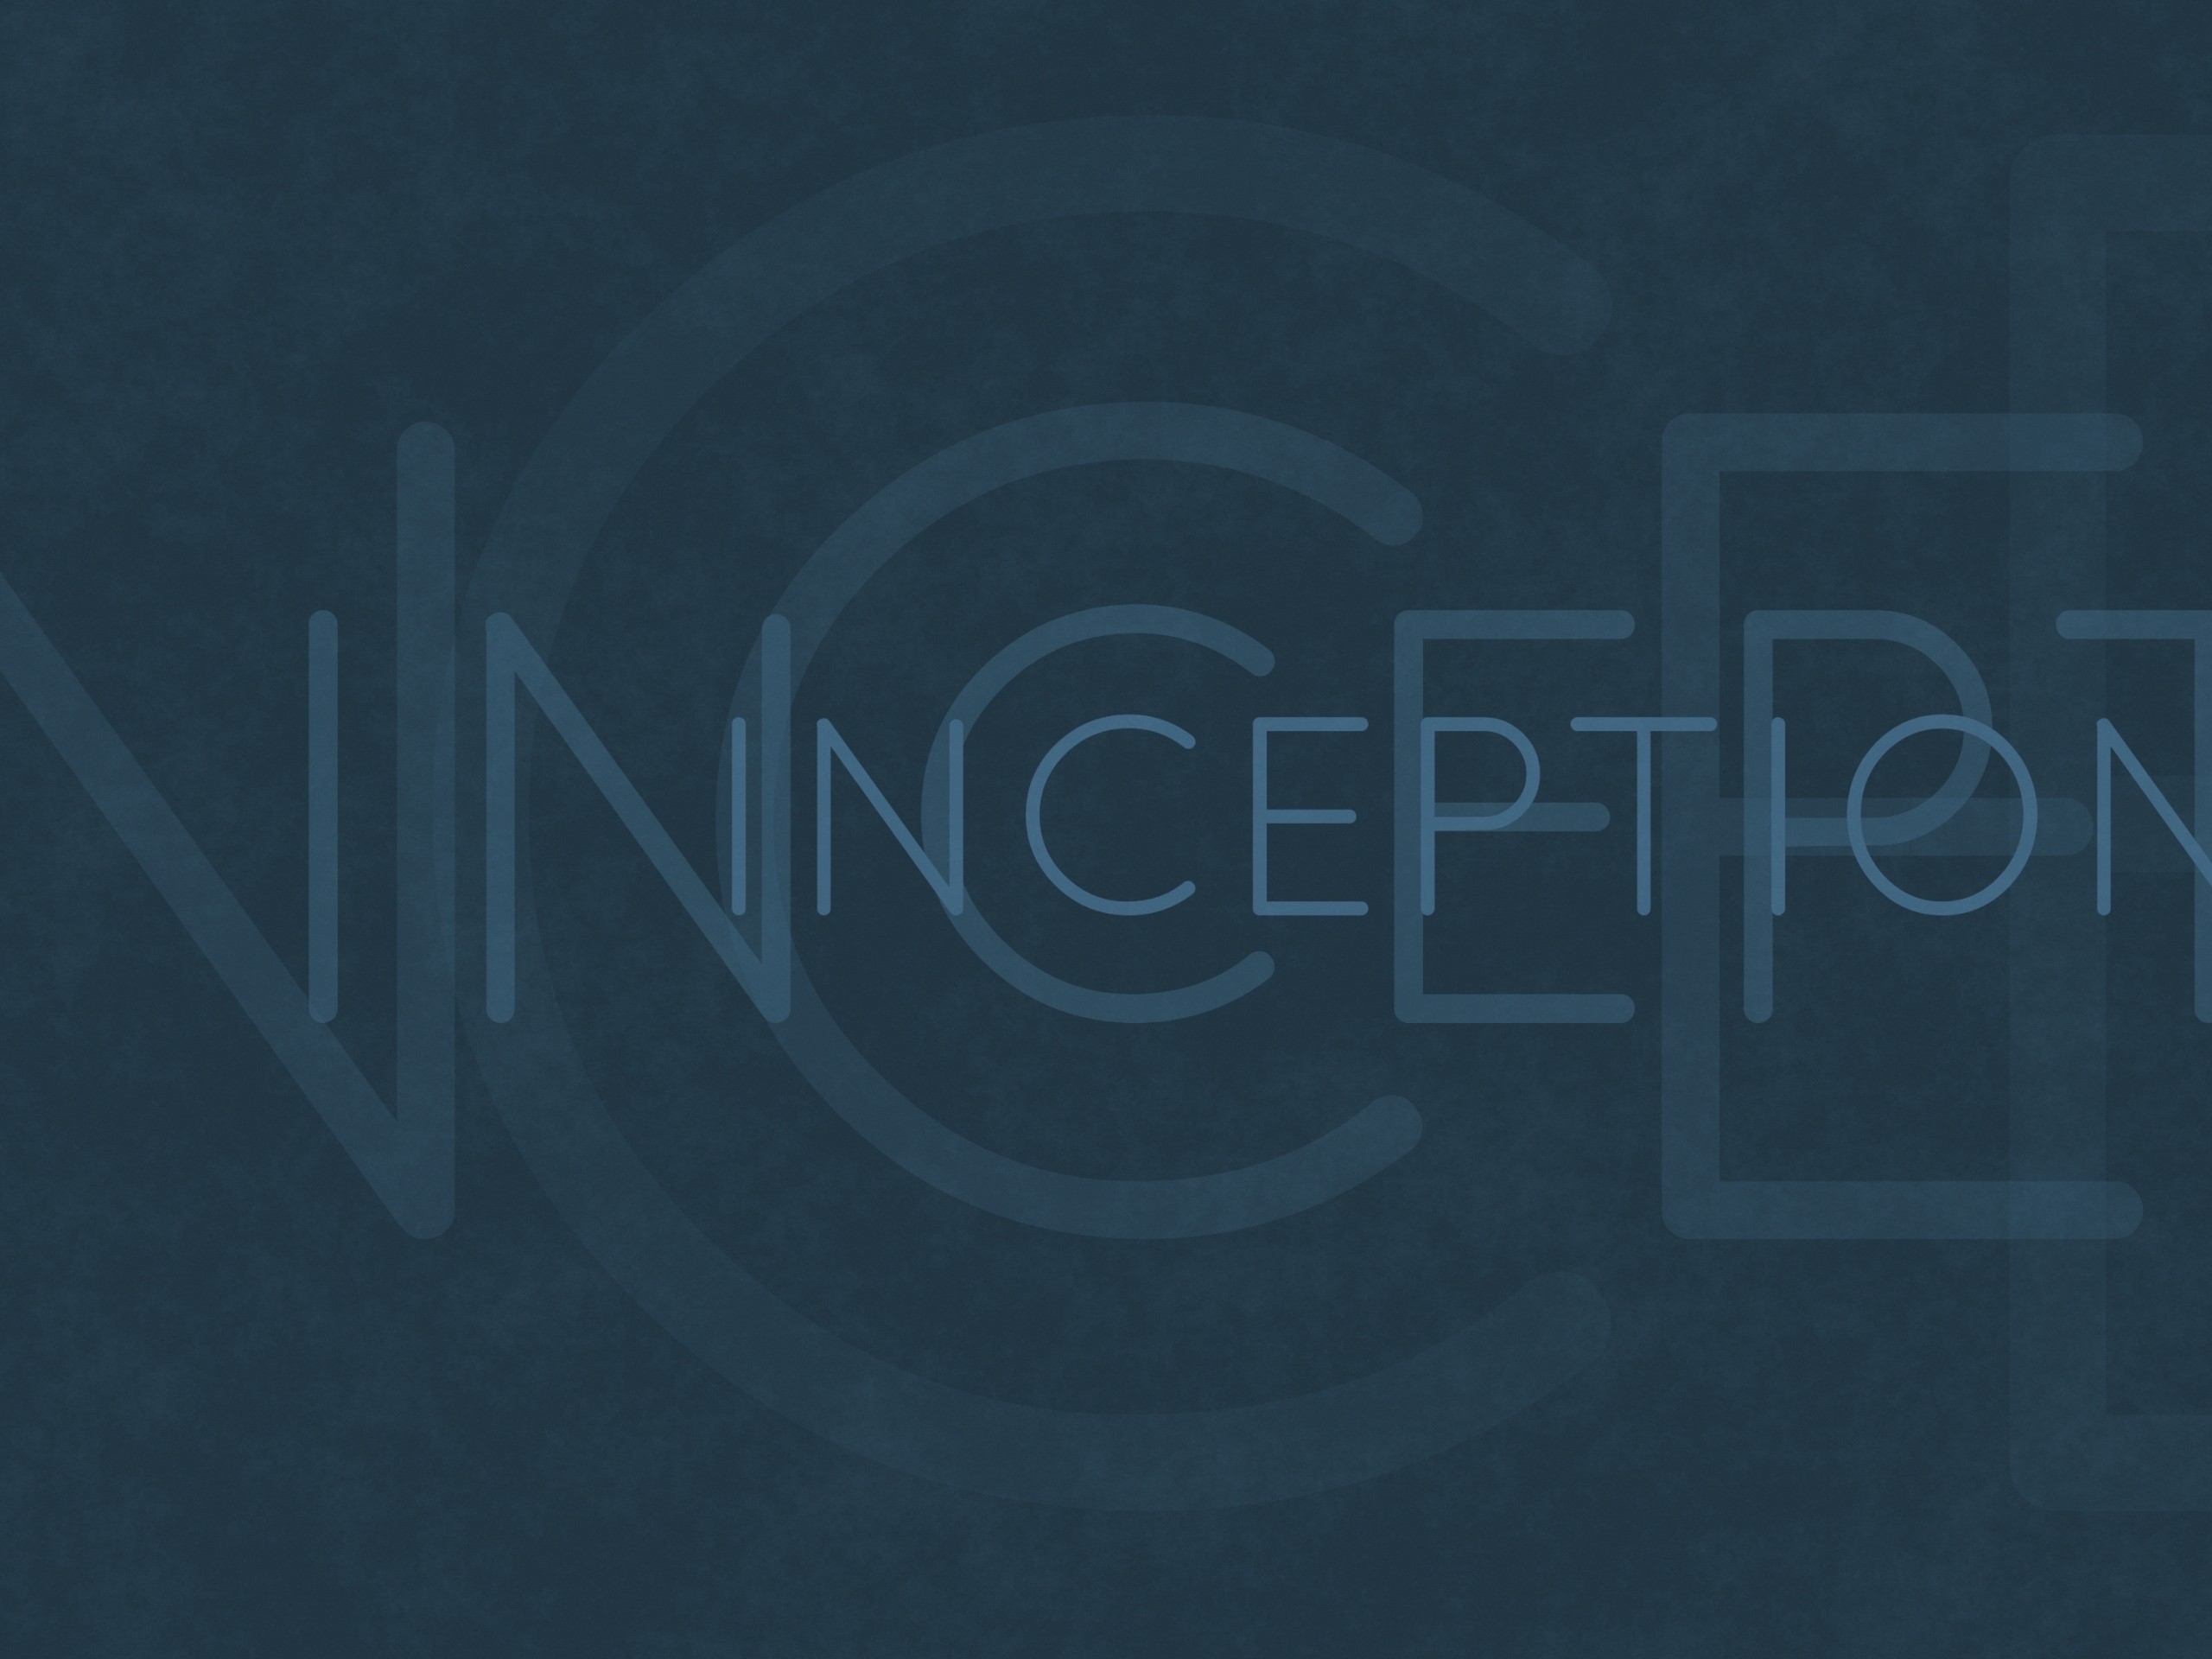 Inception, Typography Wallpaper